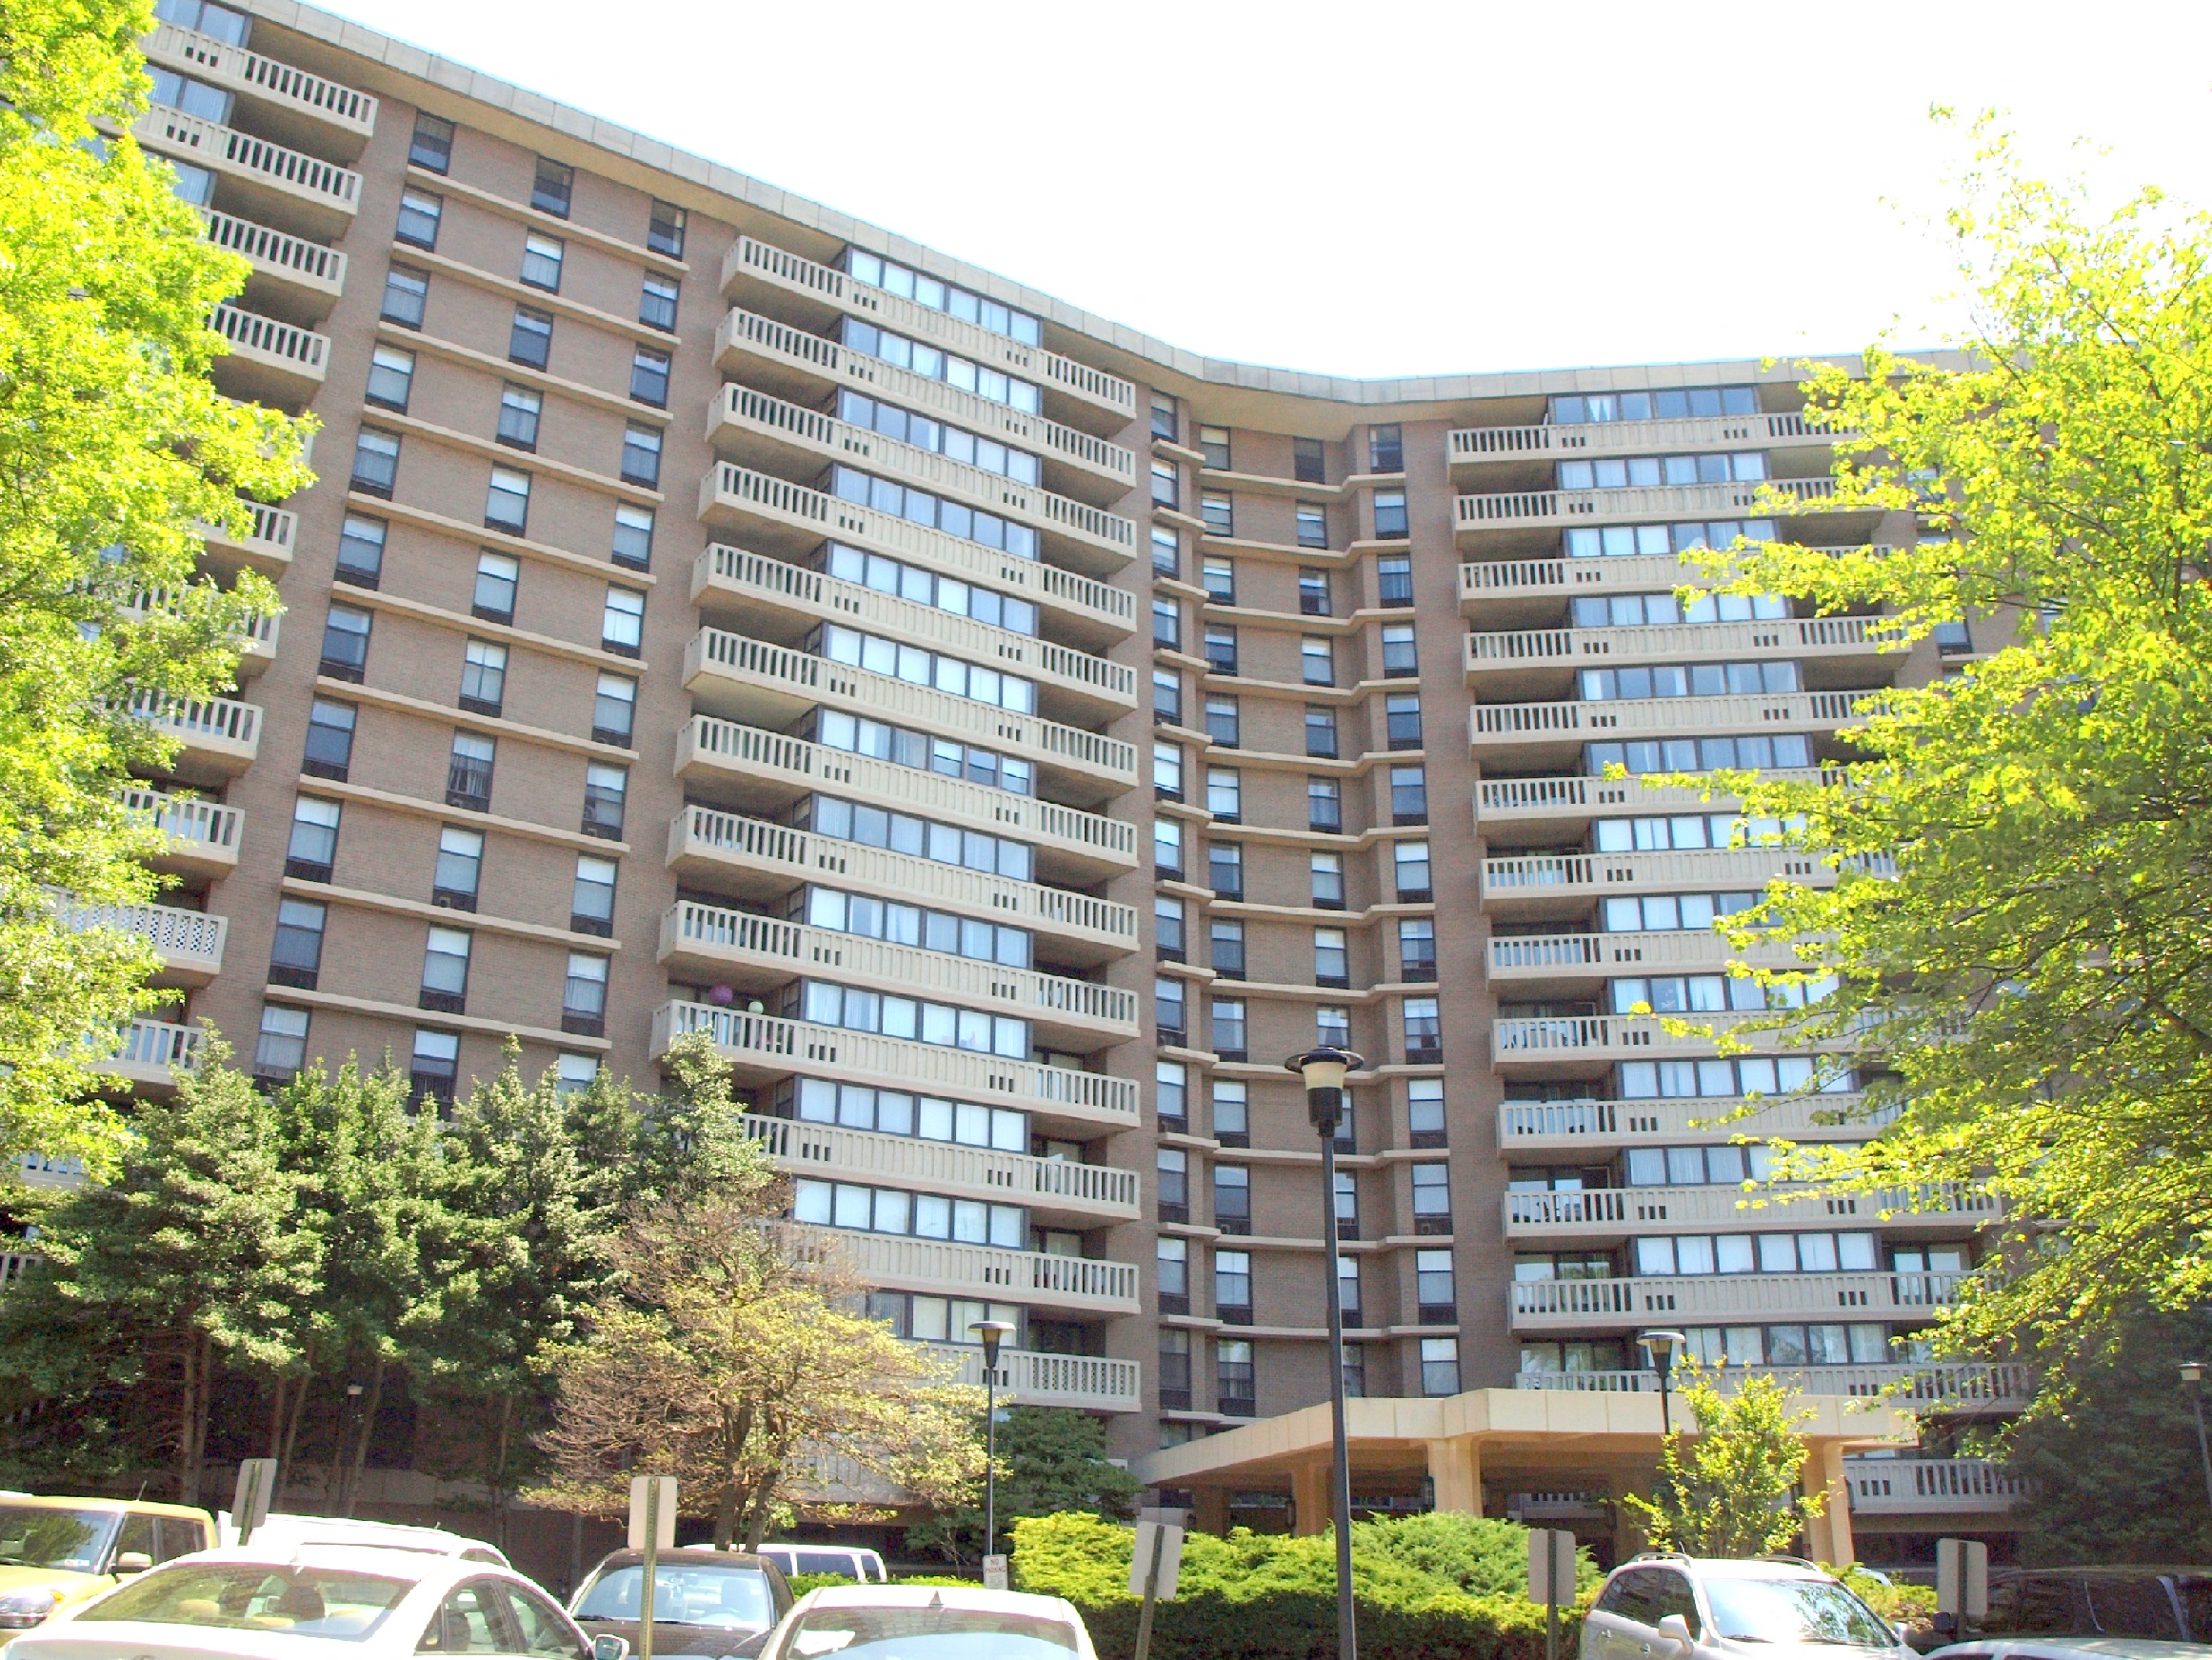 Exterior of building showing parking spaces and balconies.